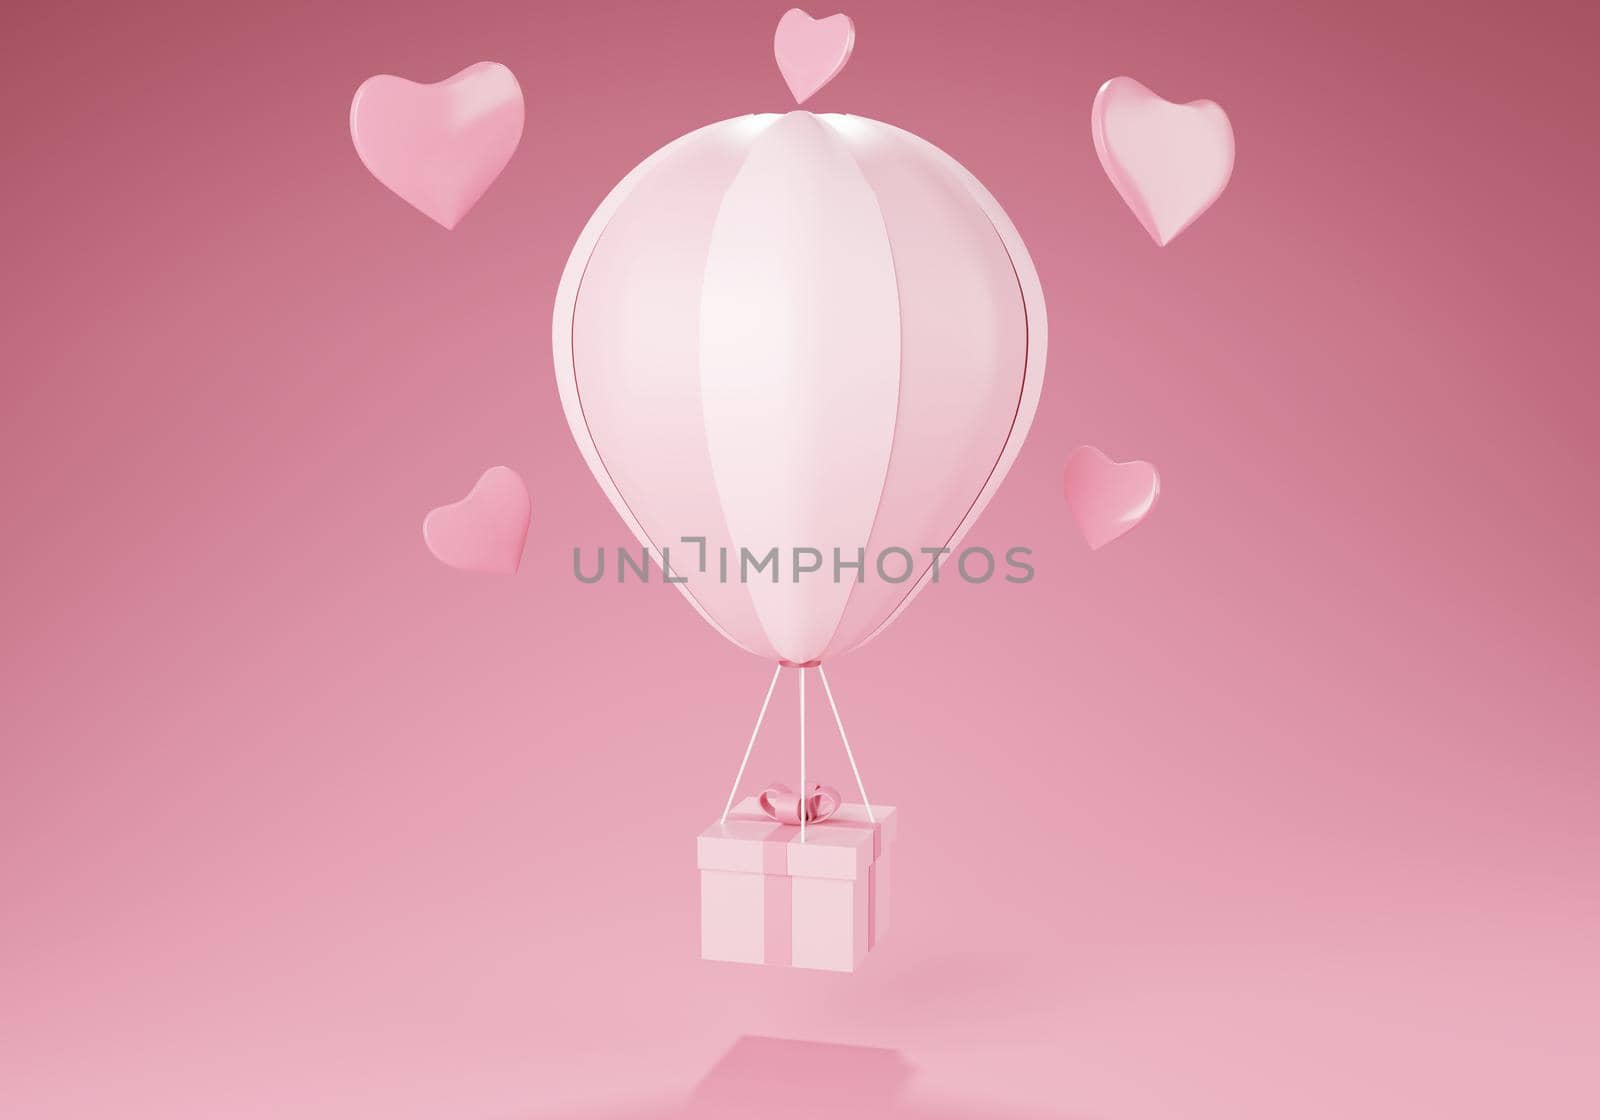 Gift box on the balloon 3D rendering by yodsawai